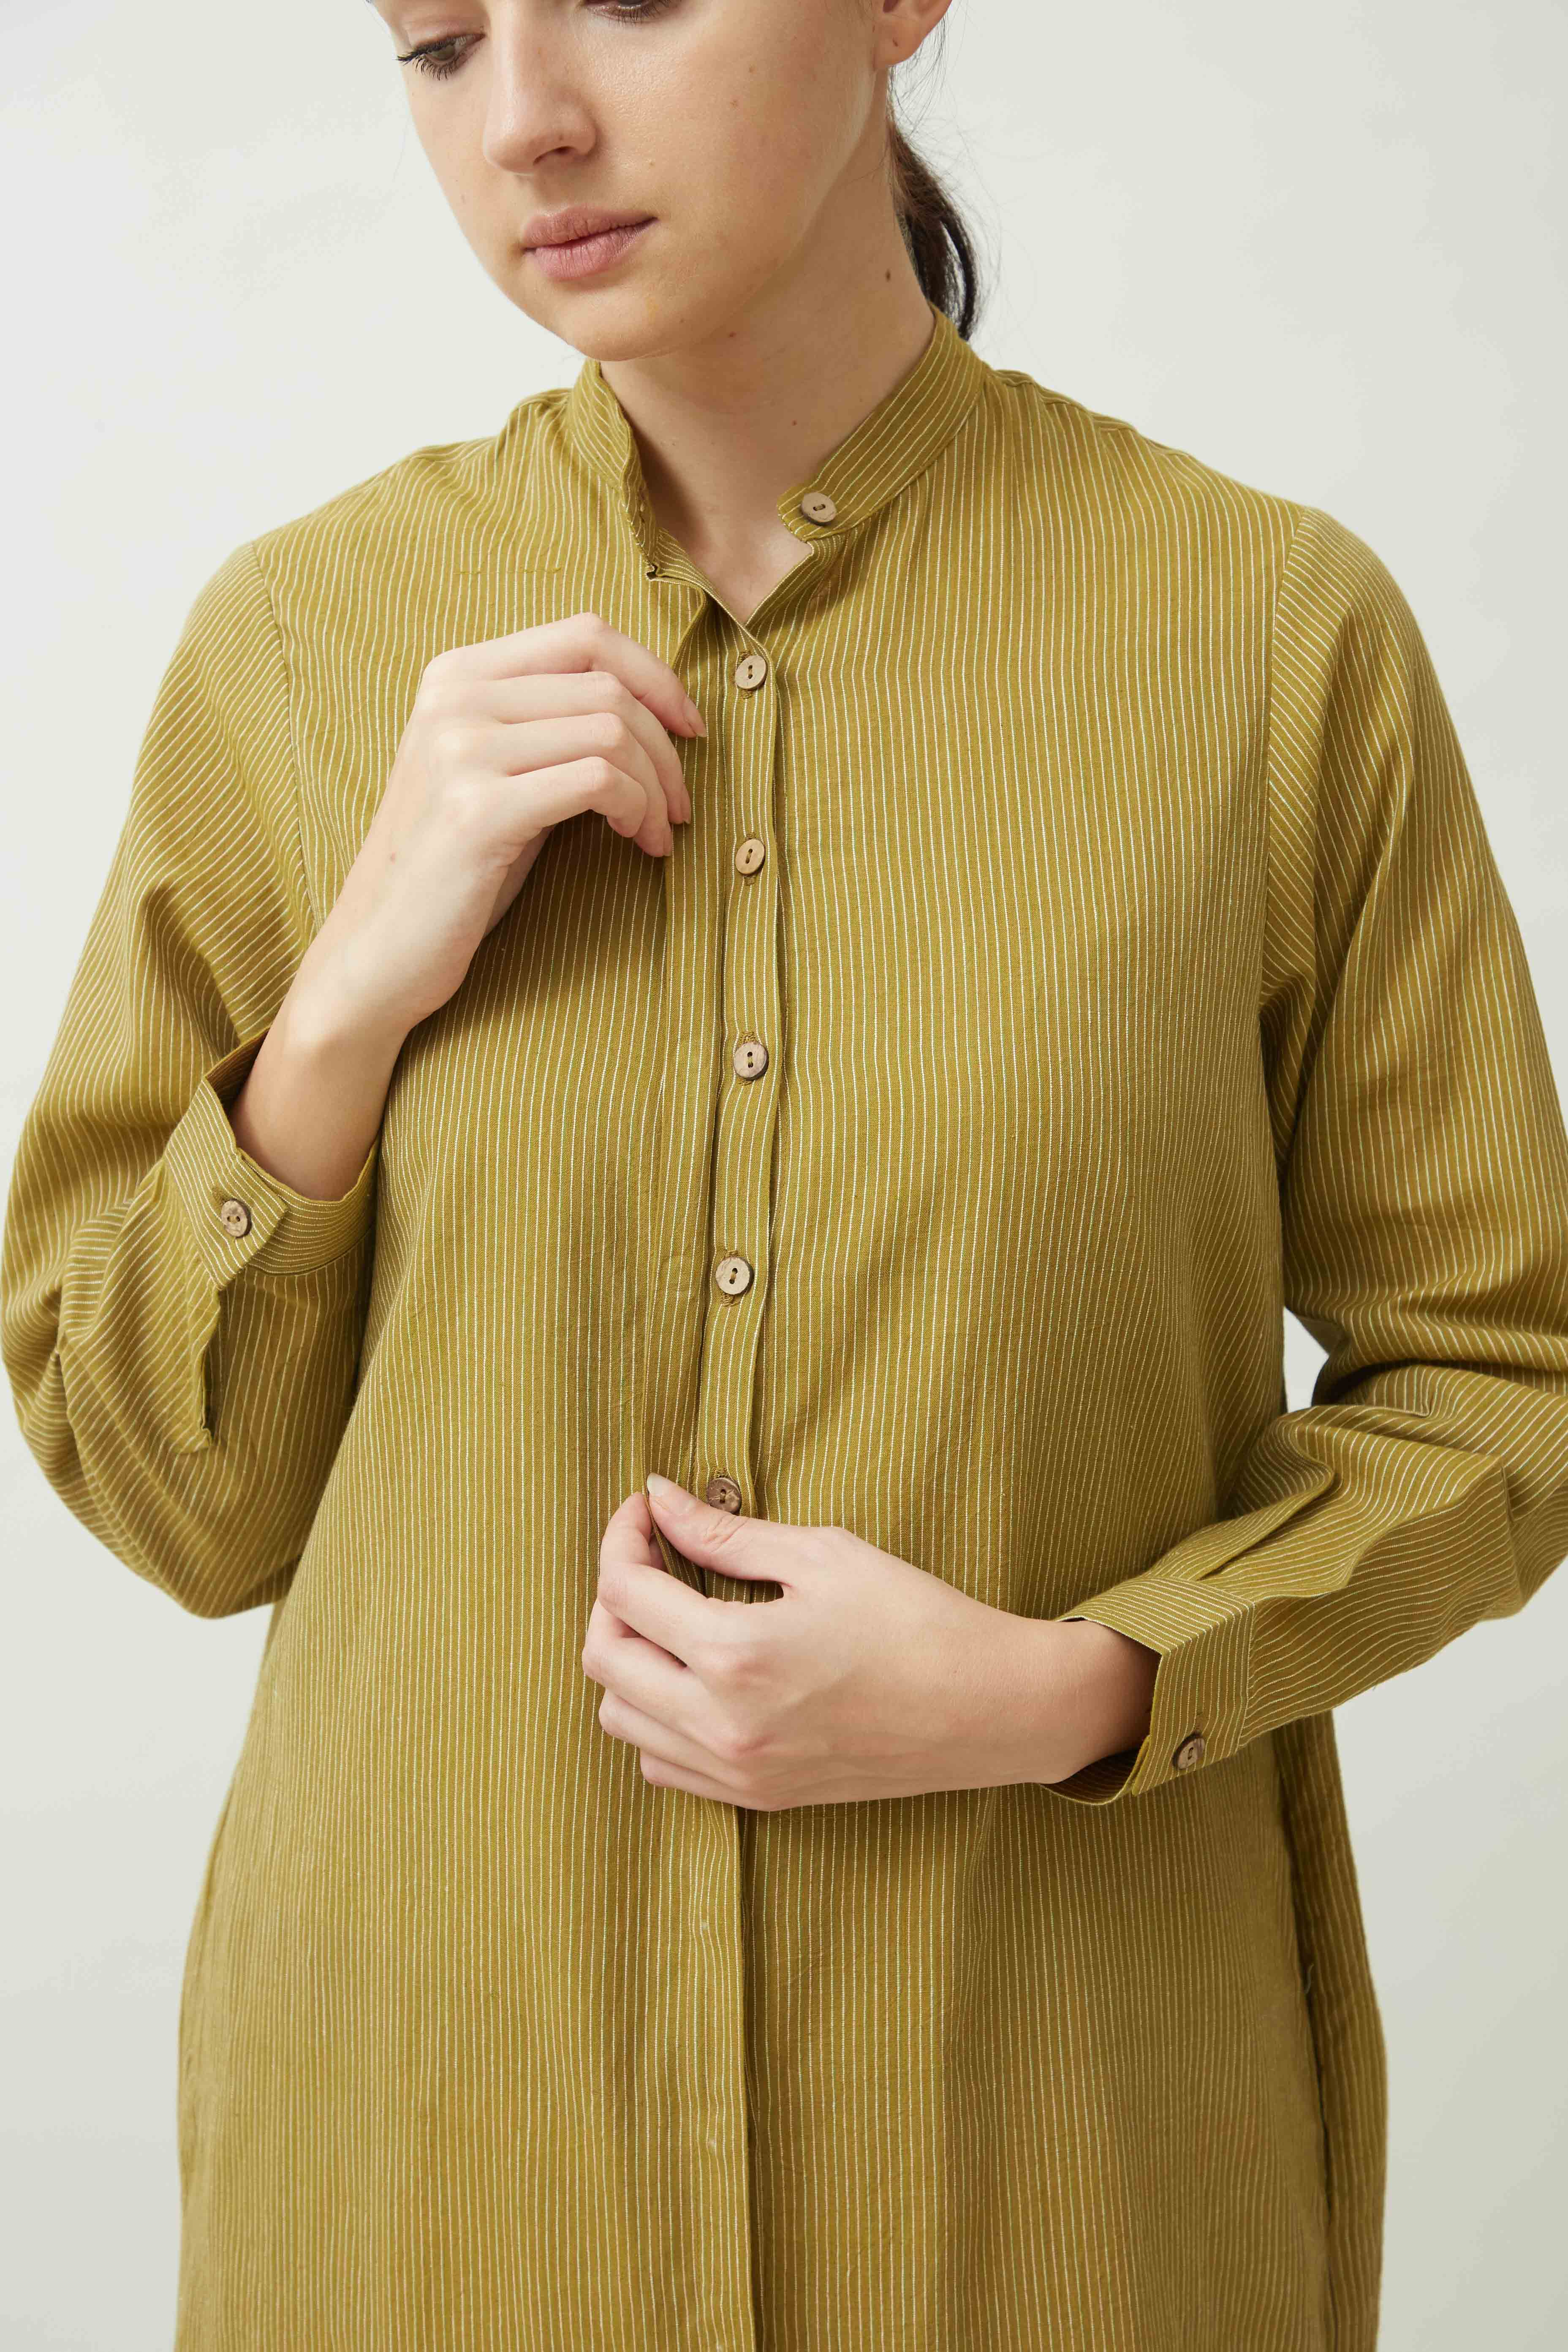 Saltpetre women's long shirt - olive green. With mandarin collared neck, deep side pockets and full sleeves. Made of 100% organic cotton